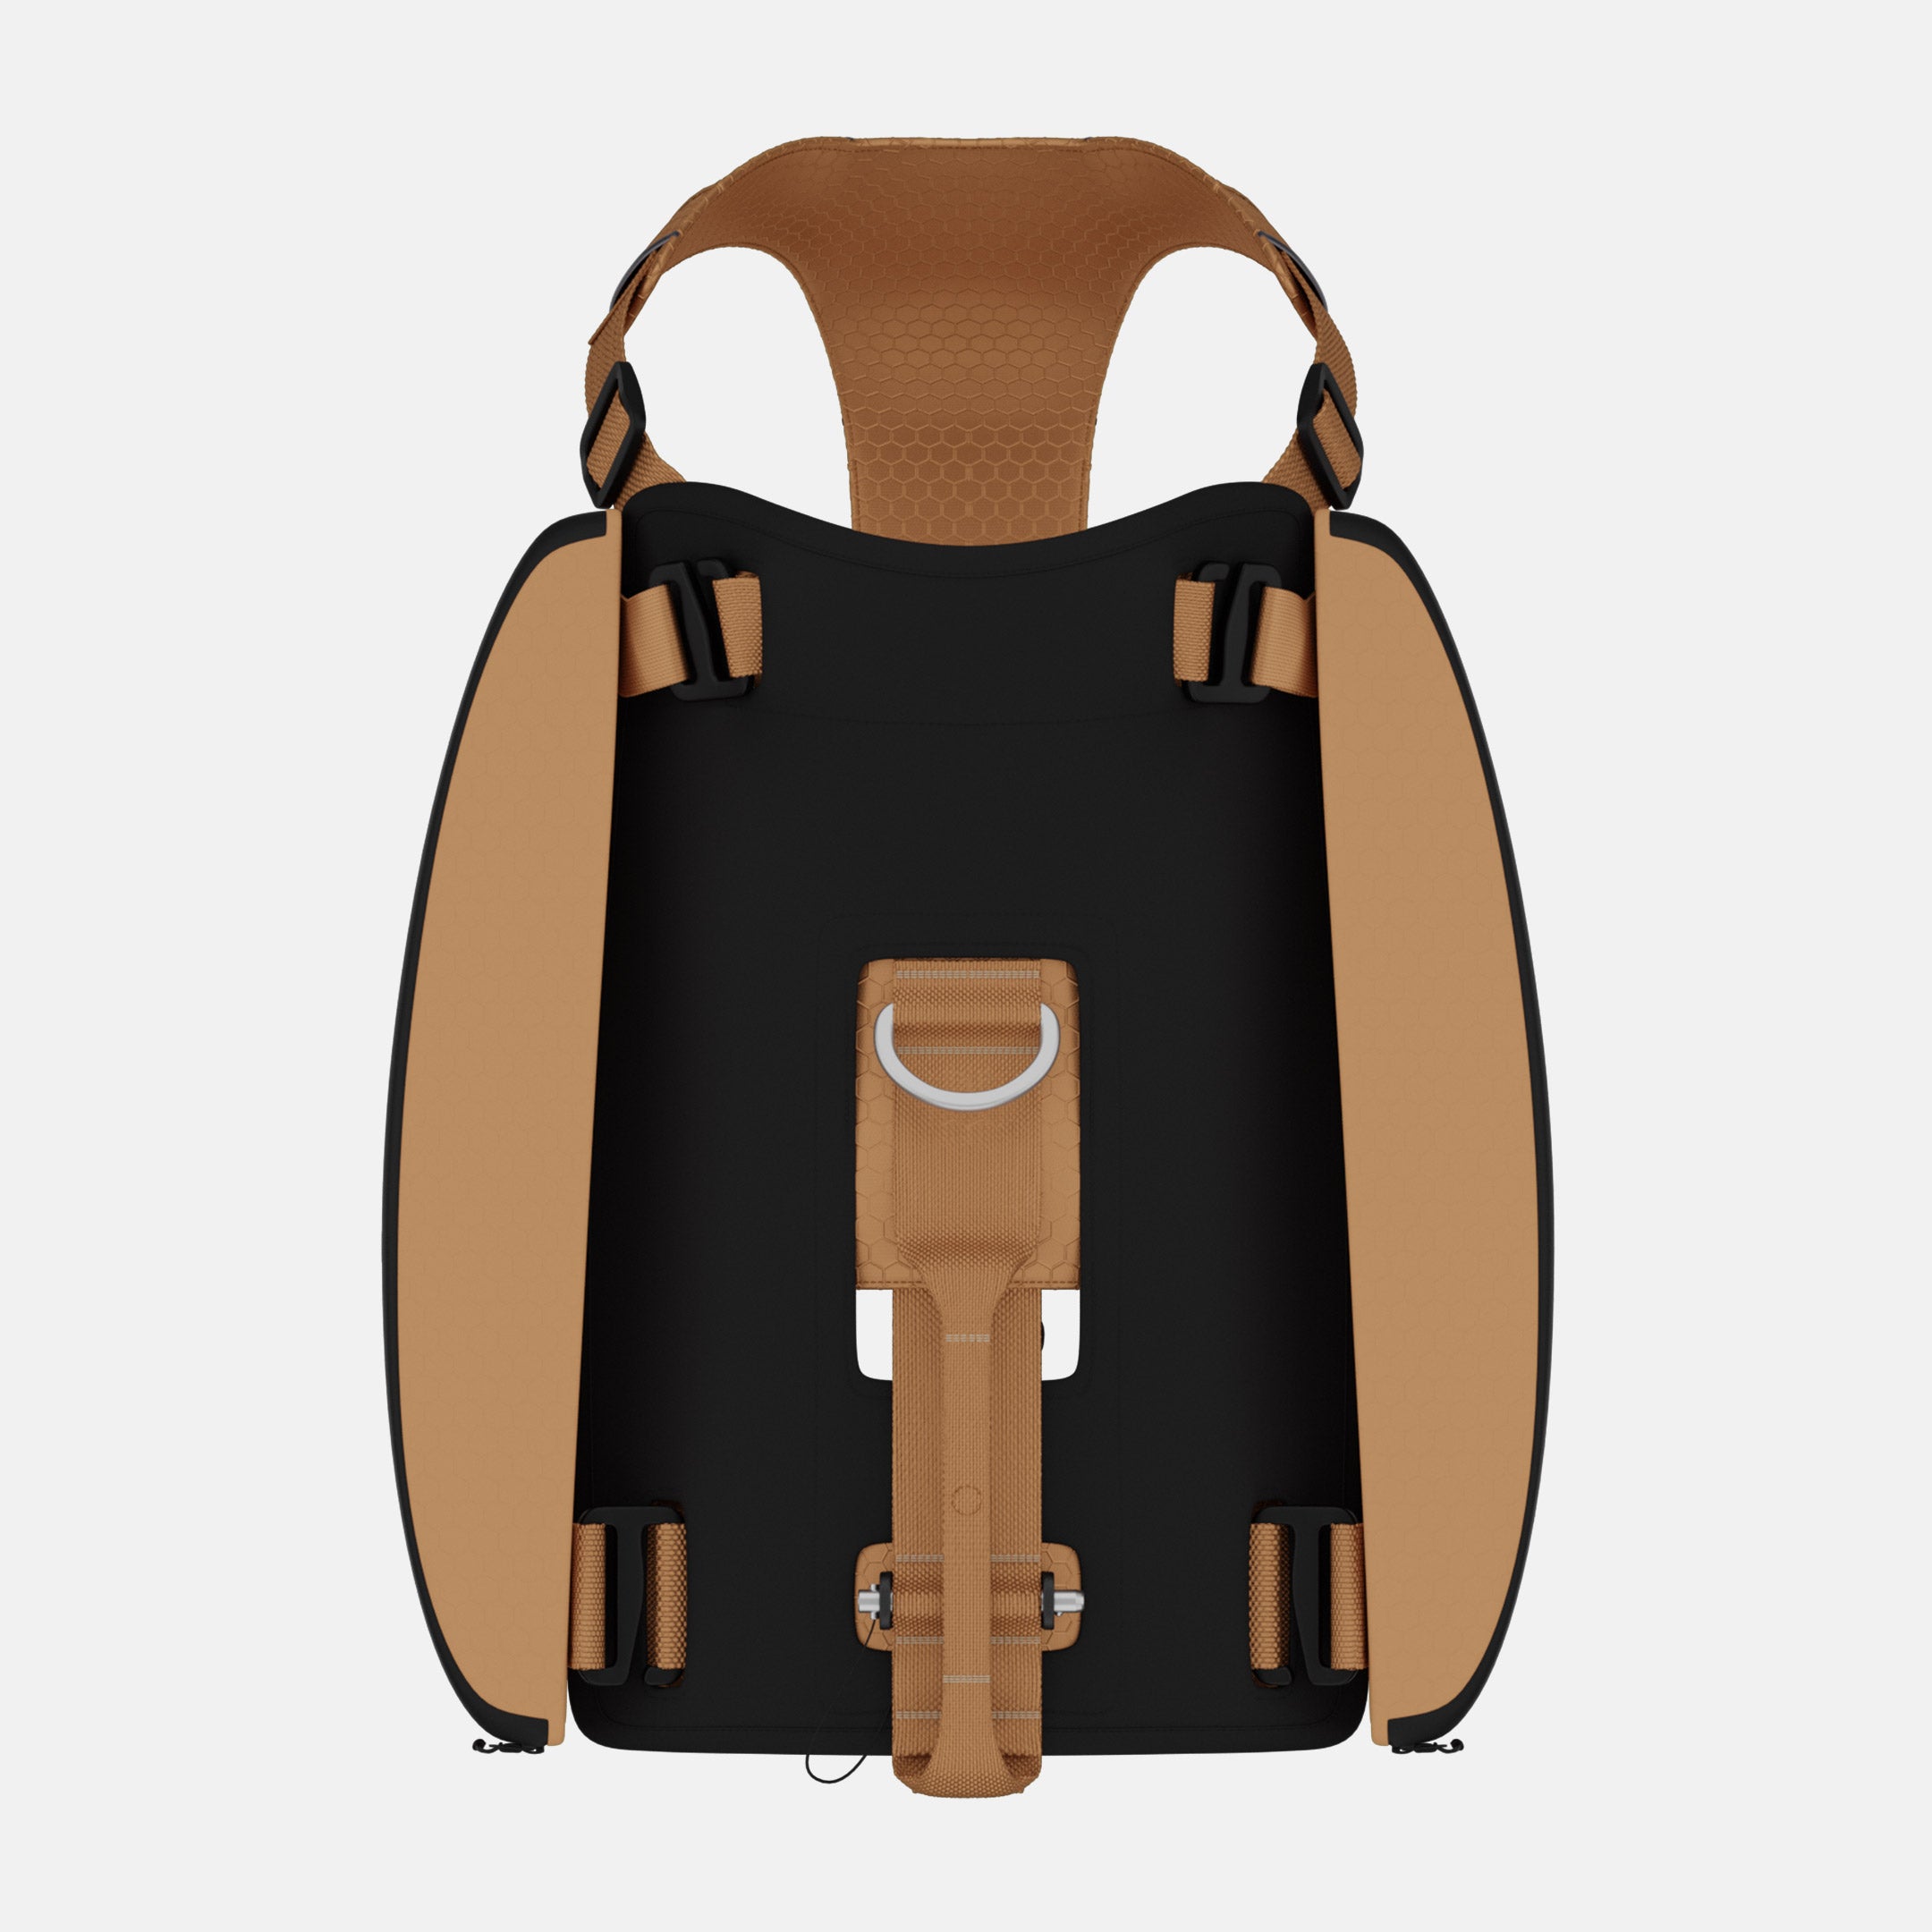 Top view of Canyon Light Pack in Sandstorm Tan, size M